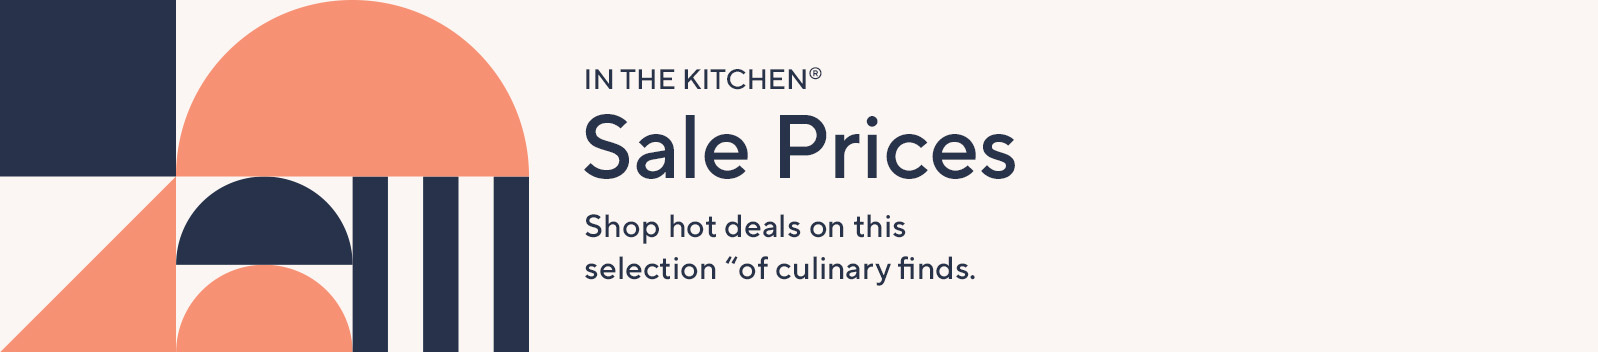 In the Kitchen® Sale Prices Shop hot deals on this selection of culinary finds. 